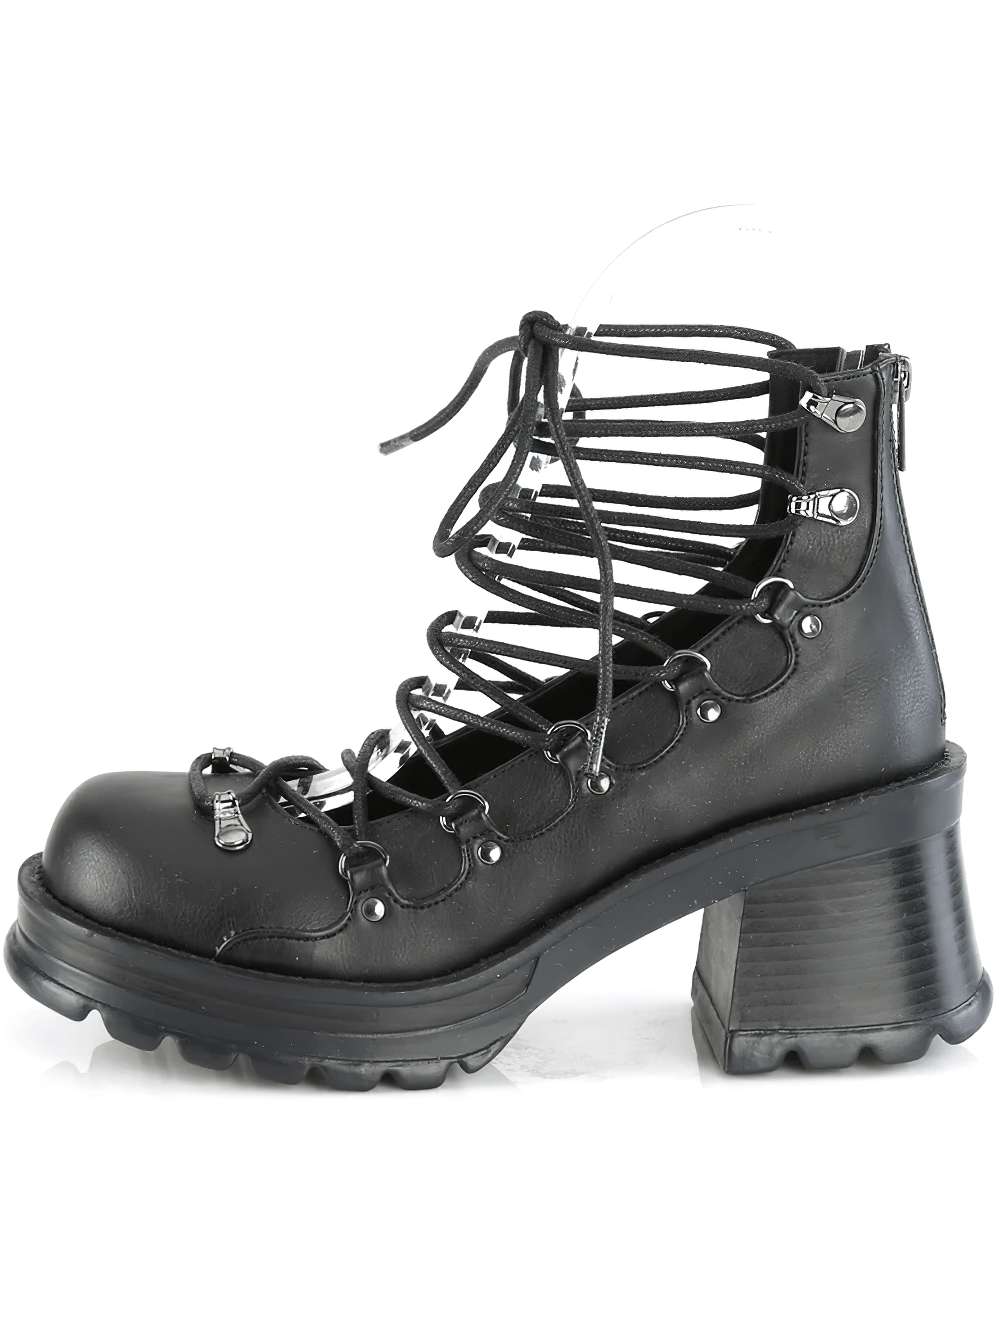 DEMONIA Edgy Black Ankle Boot with Chunky Heel and Zip